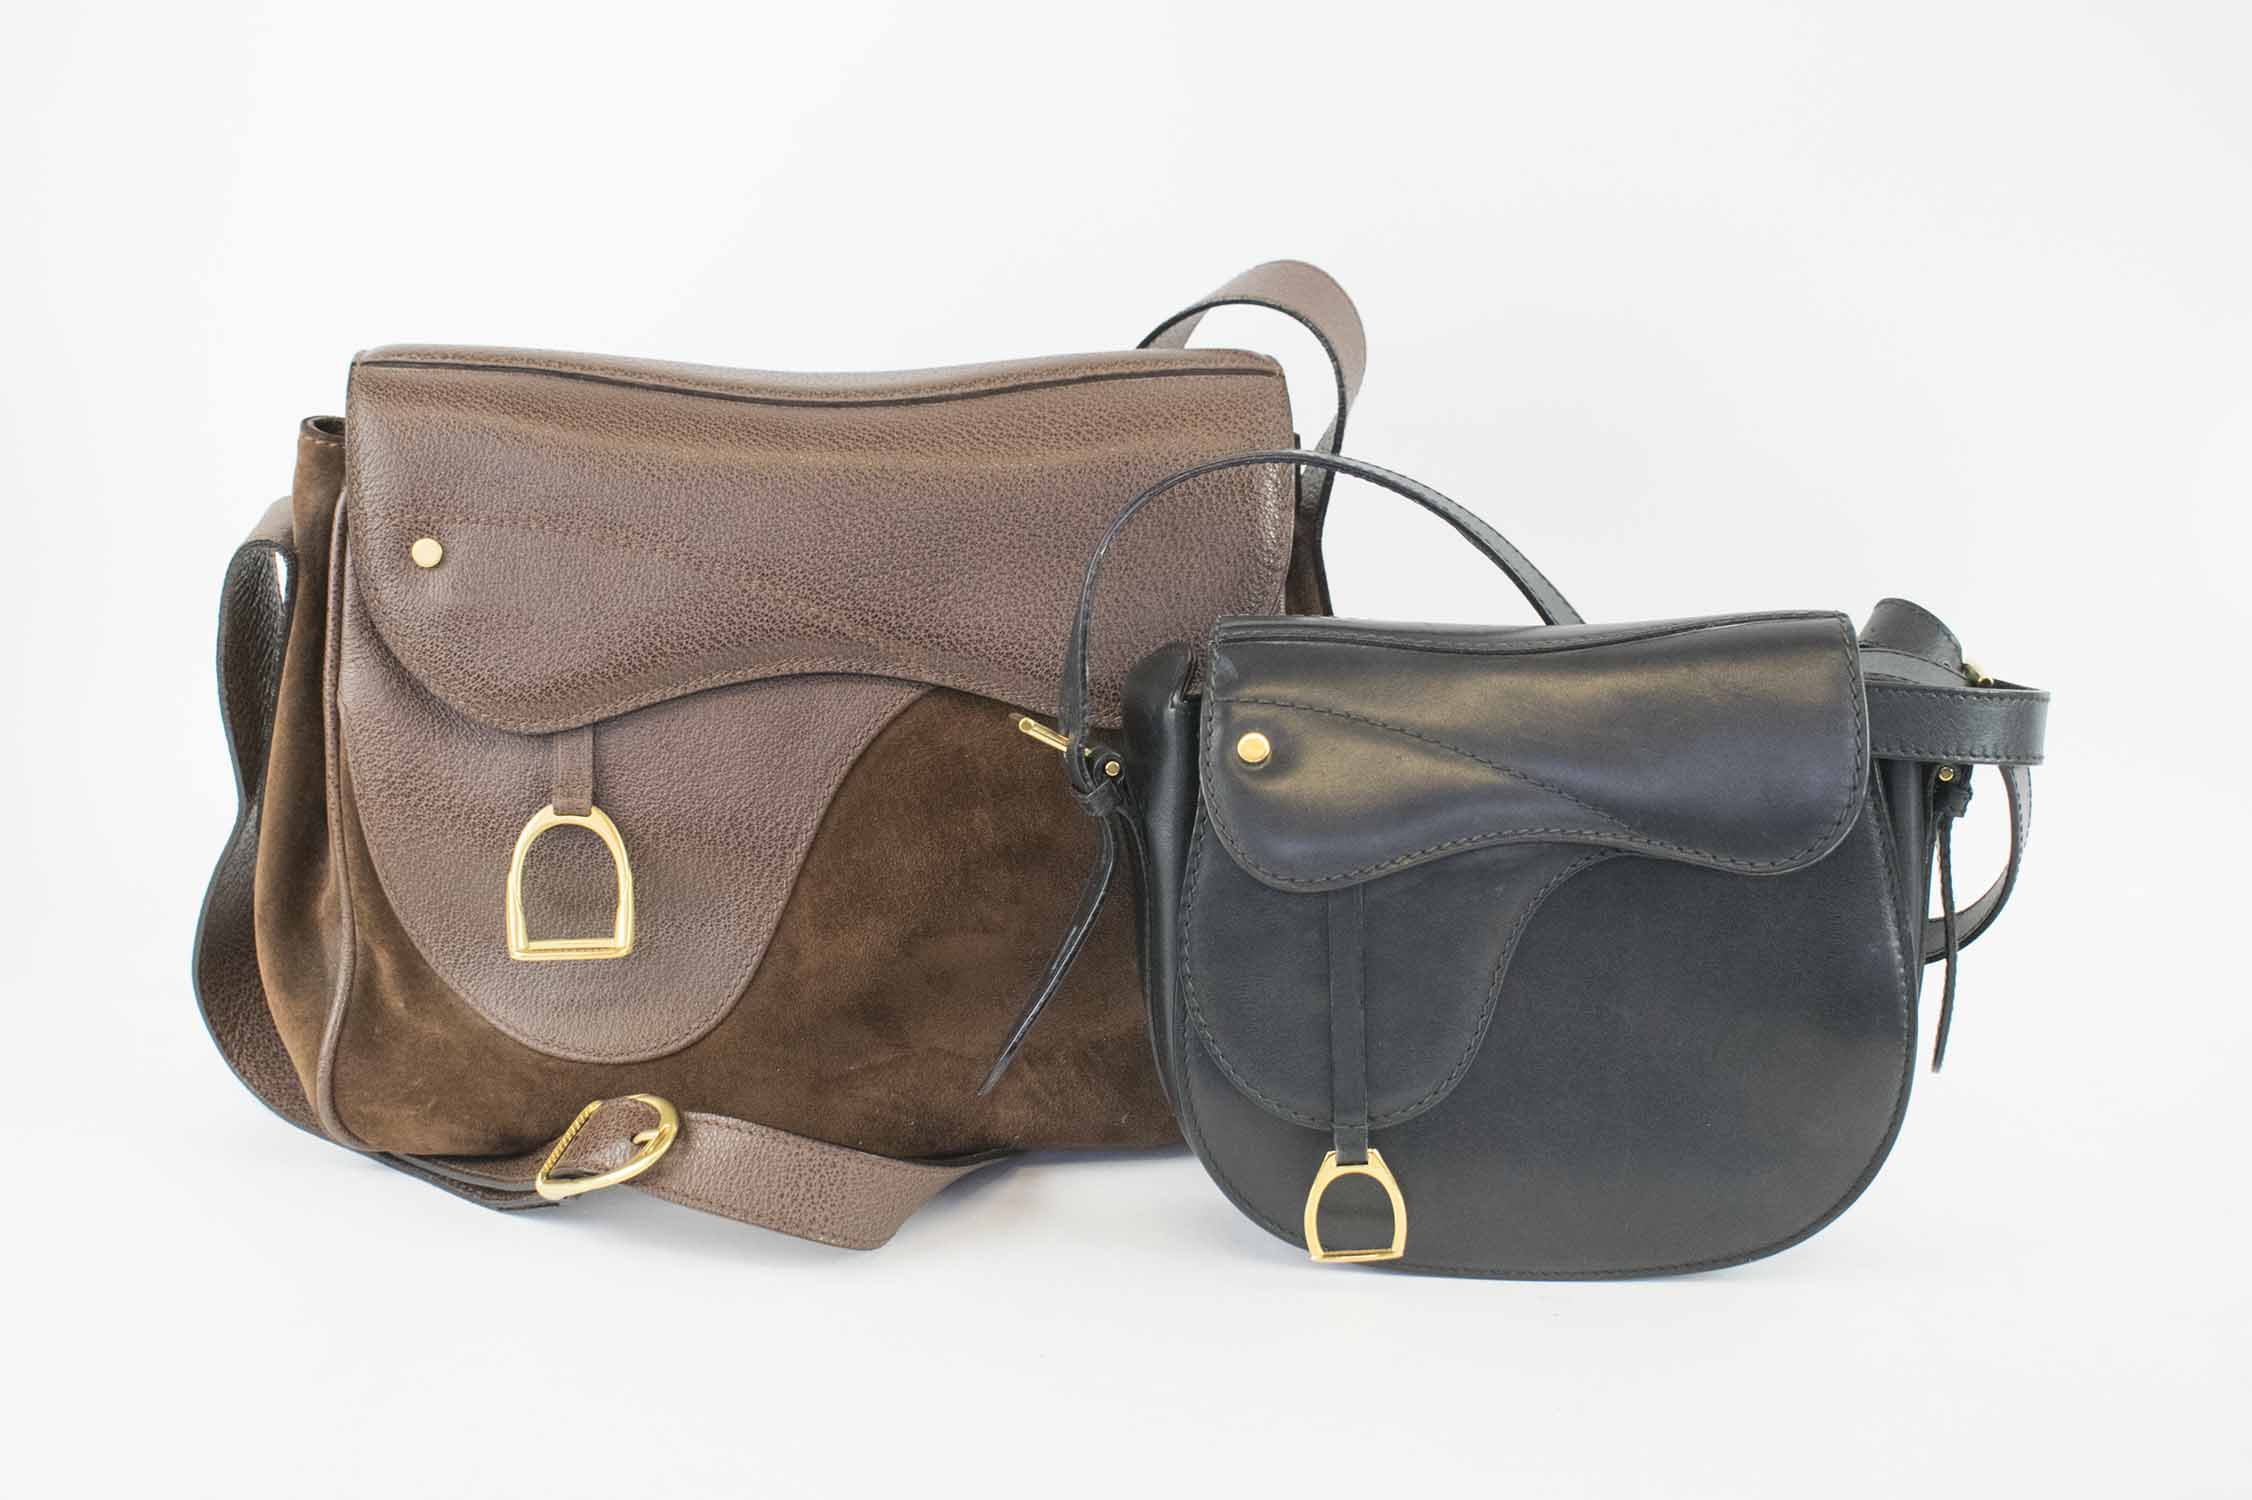 GUCCI SADDLE BAGS, with equestrian stirrup charm, one leather and suede 30cm 23cm H x 12cm, the other black leather 20cm x 18cm H x 6cm both with adjustable